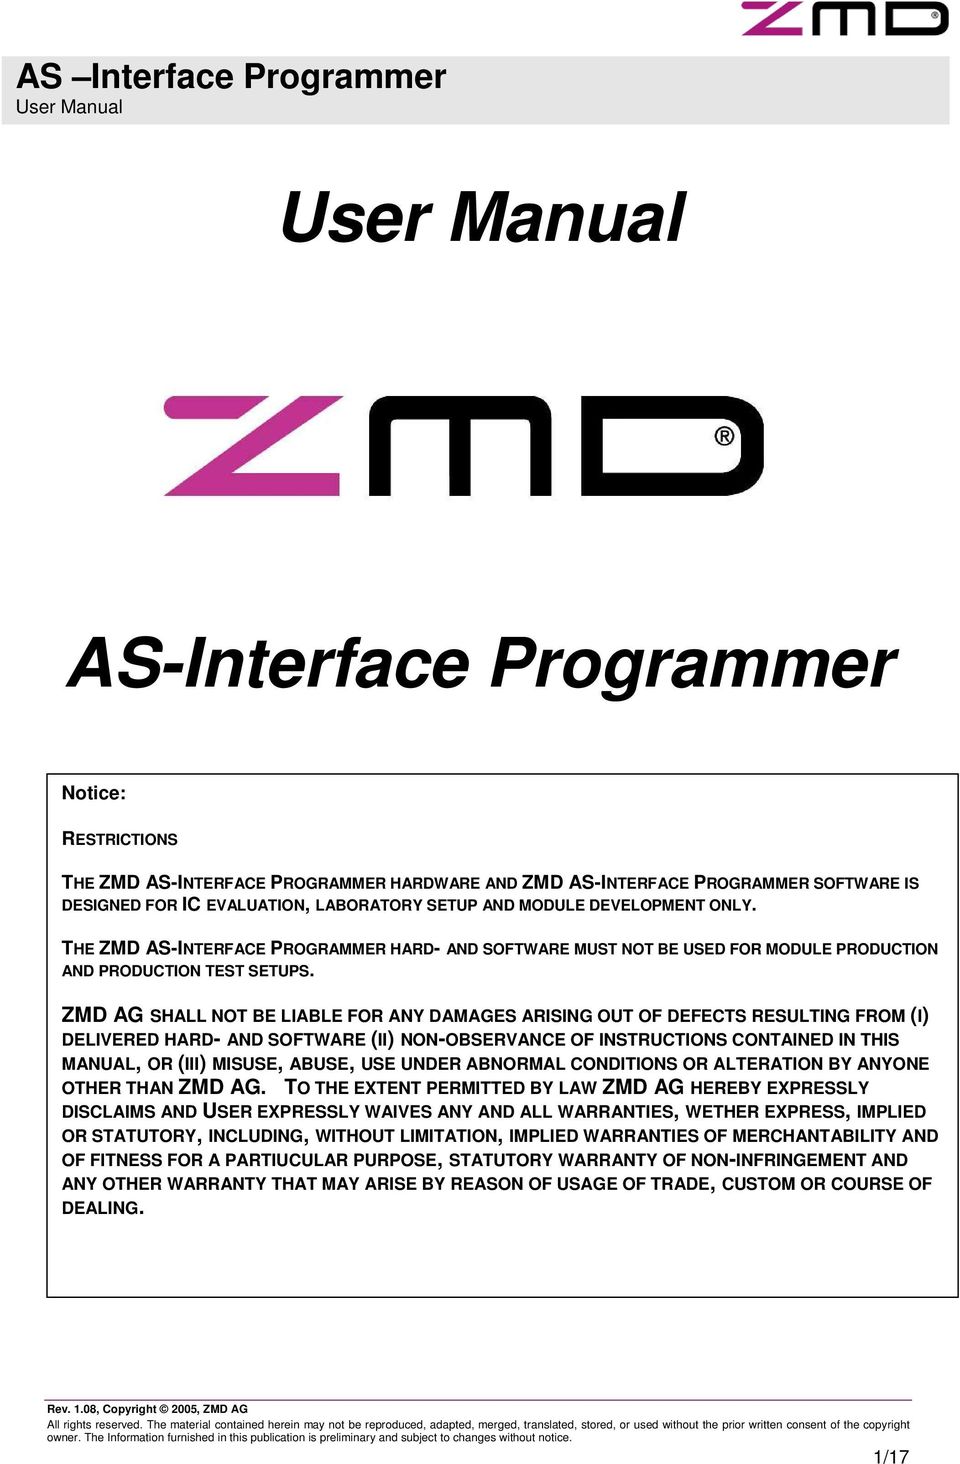 ZMD AG SHALL NOT BE LIABLE FOR ANY DAMAGES ARISING OUT OF DEFECTS RESULTING FROM (I) DELIVERED HARD- AND SOFTWARE (II) NON-OBSERVANCE OF INSTRUCTIONS CONTAINED IN THIS MANUAL, OR (III) MISUSE, ABUSE,